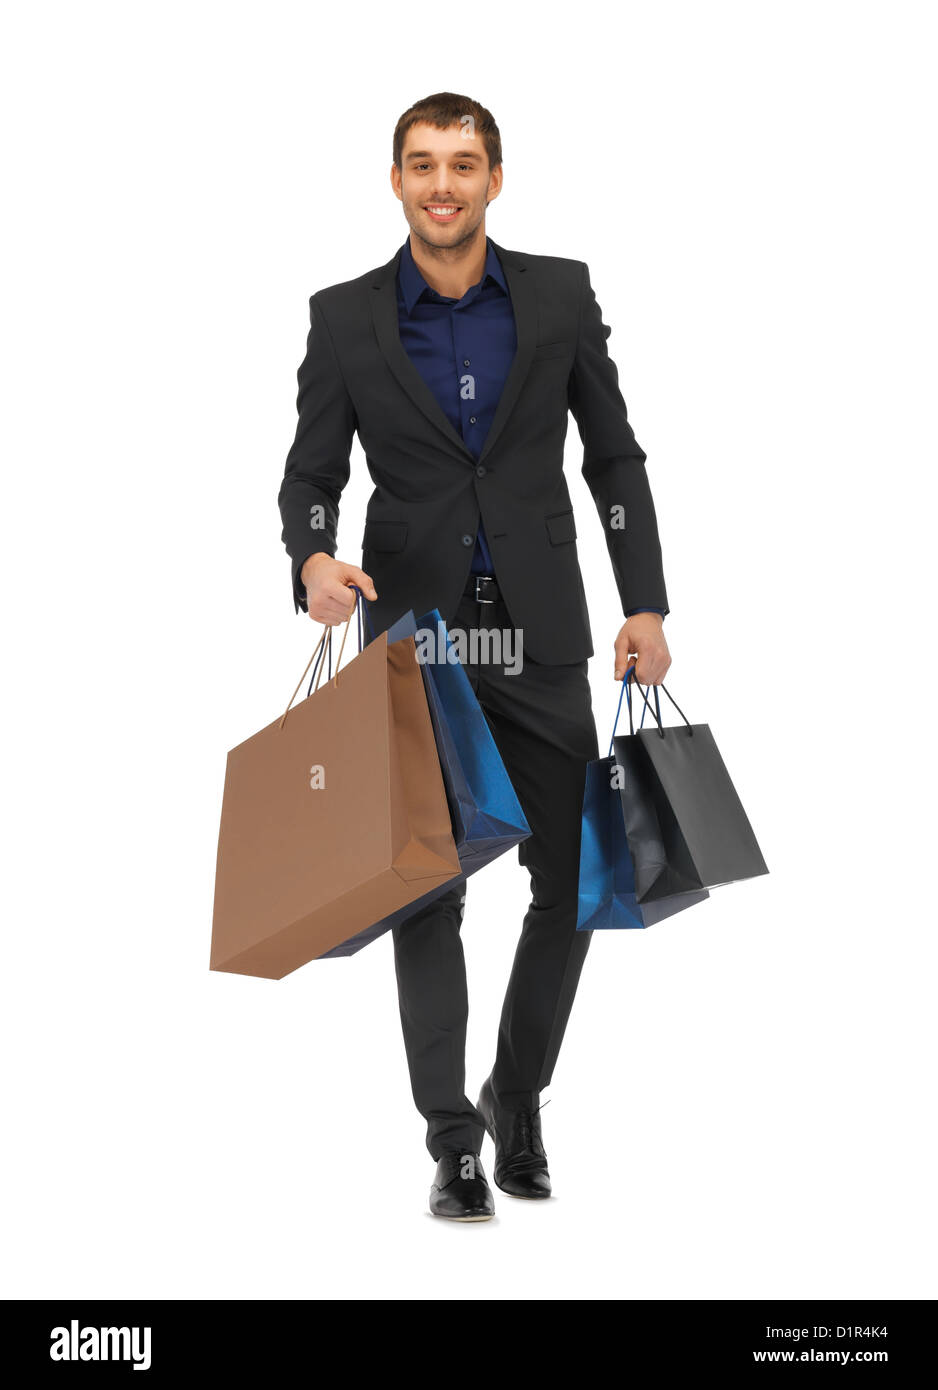 handsome man in suit with shopping bags Stock Photo